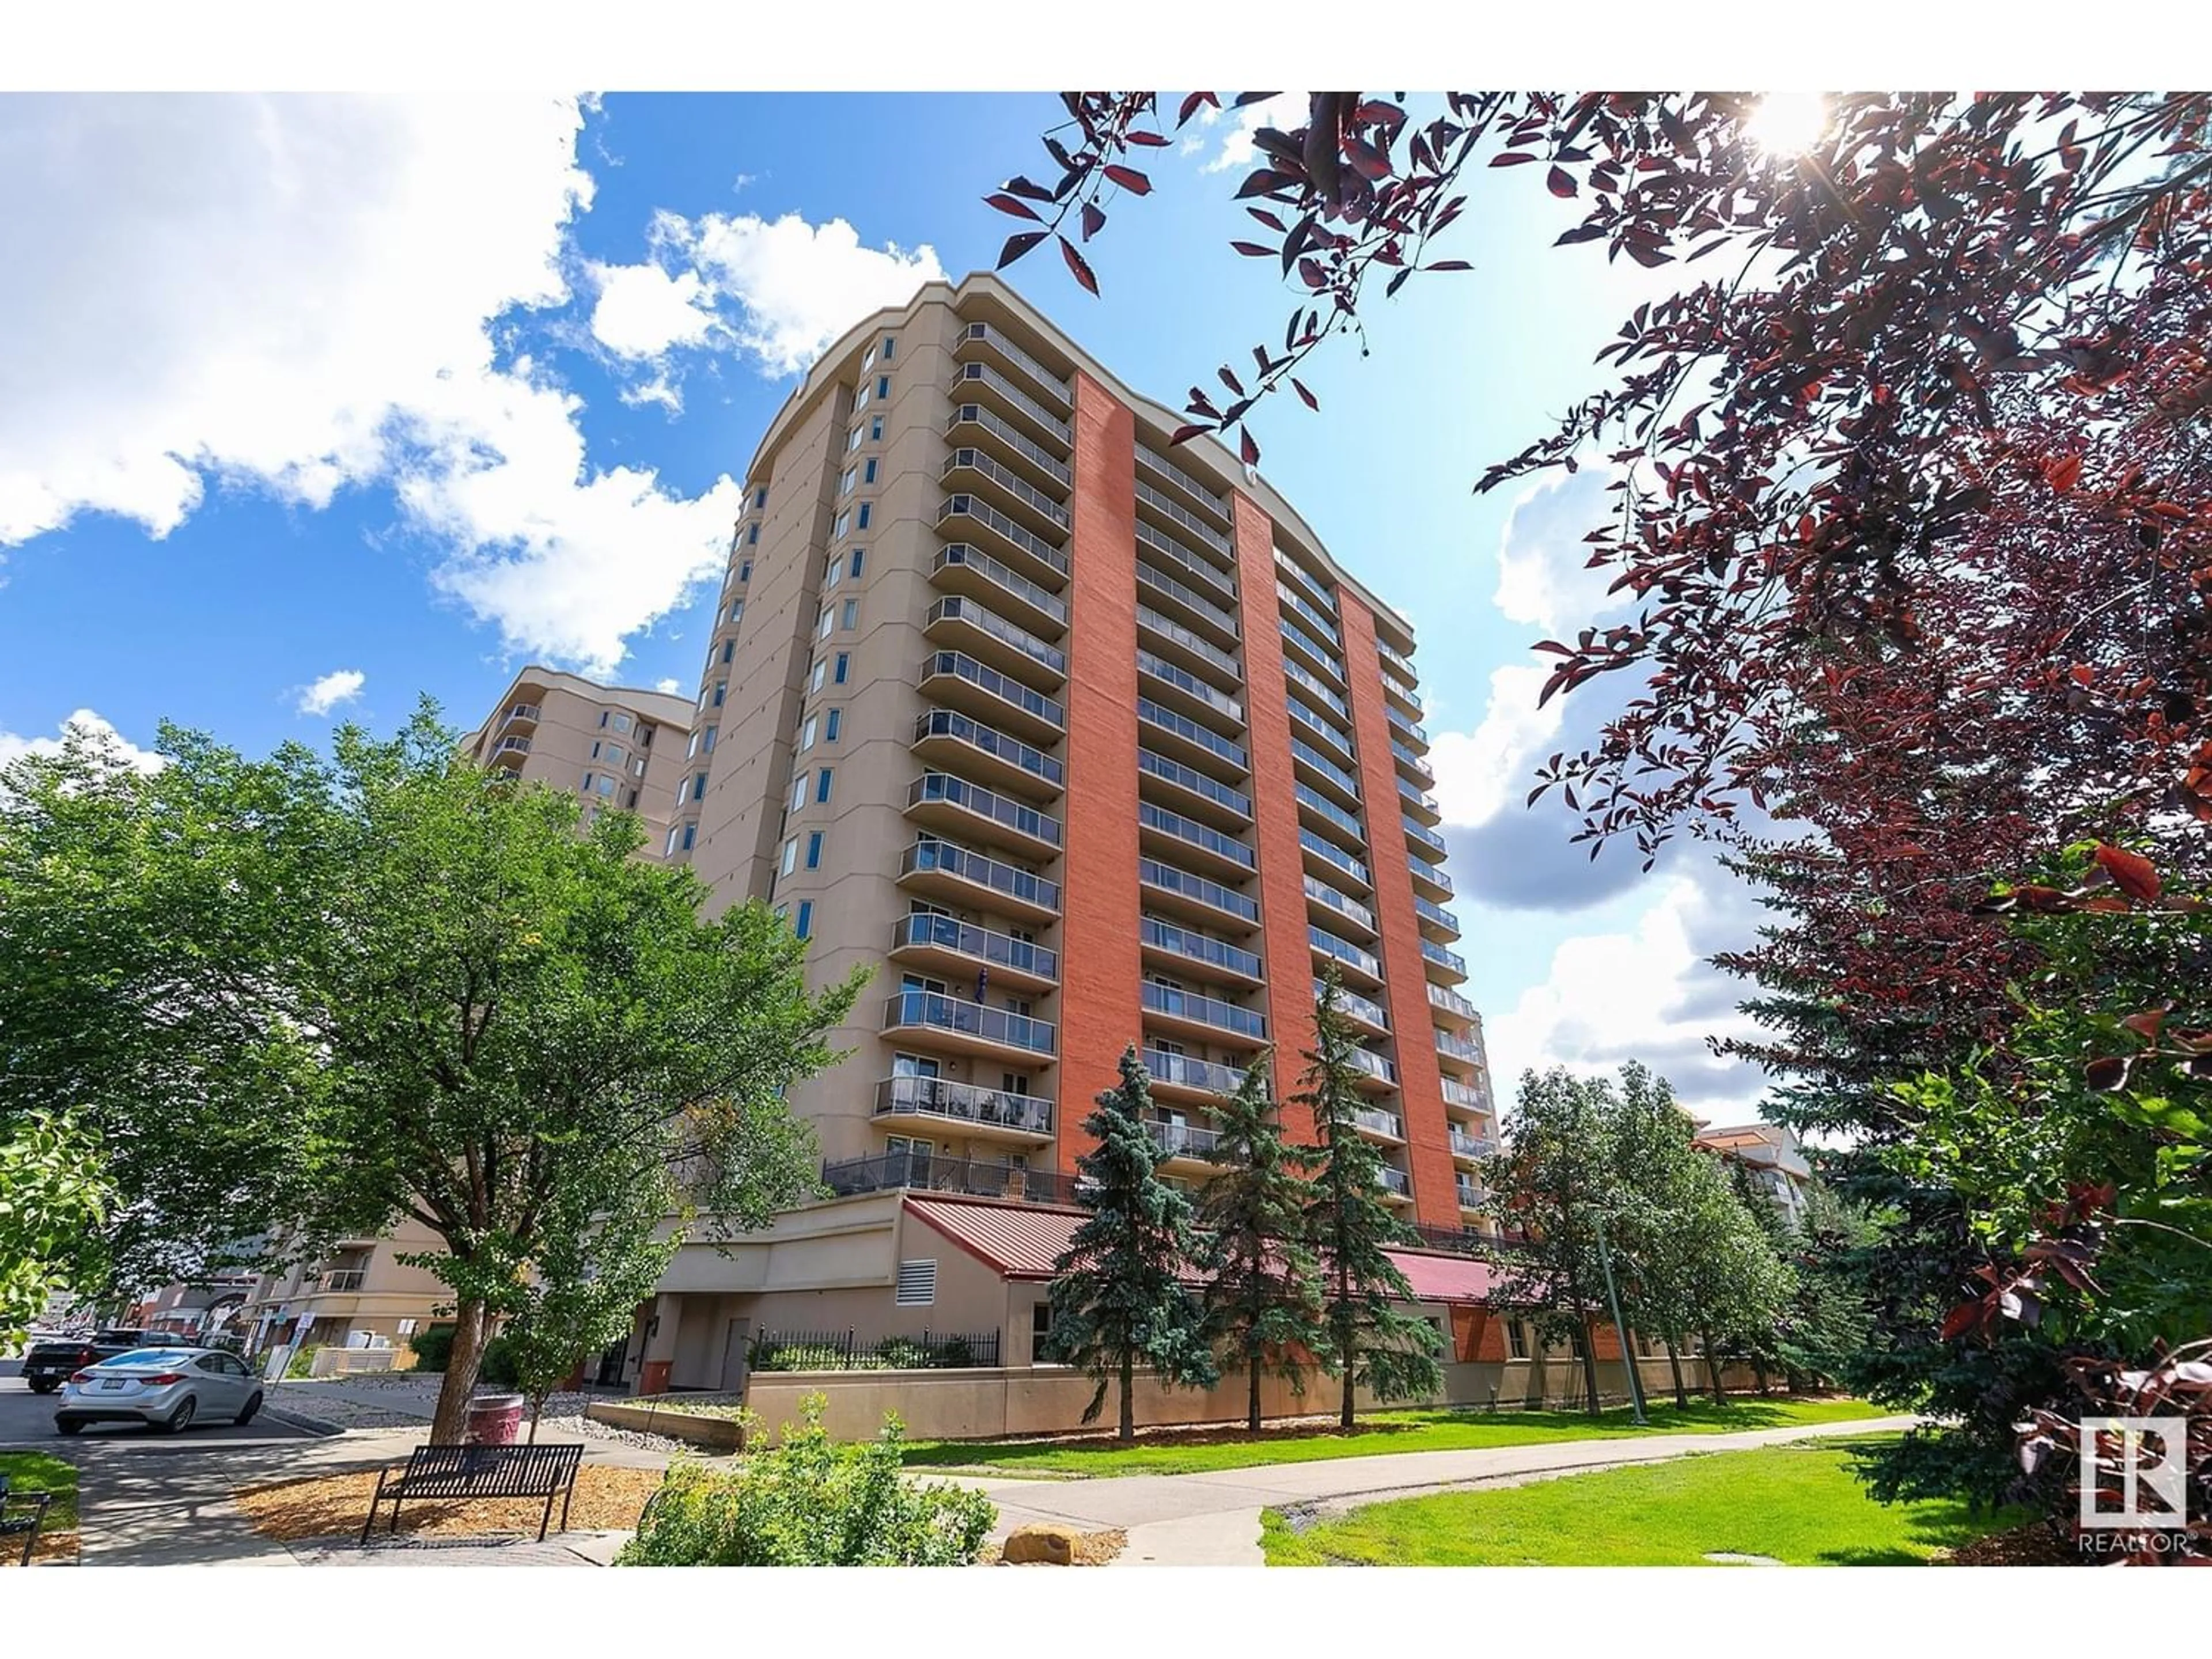 A pic from exterior of the house or condo for #1107 10909 103 AV NW, Edmonton Alberta T5K2W7